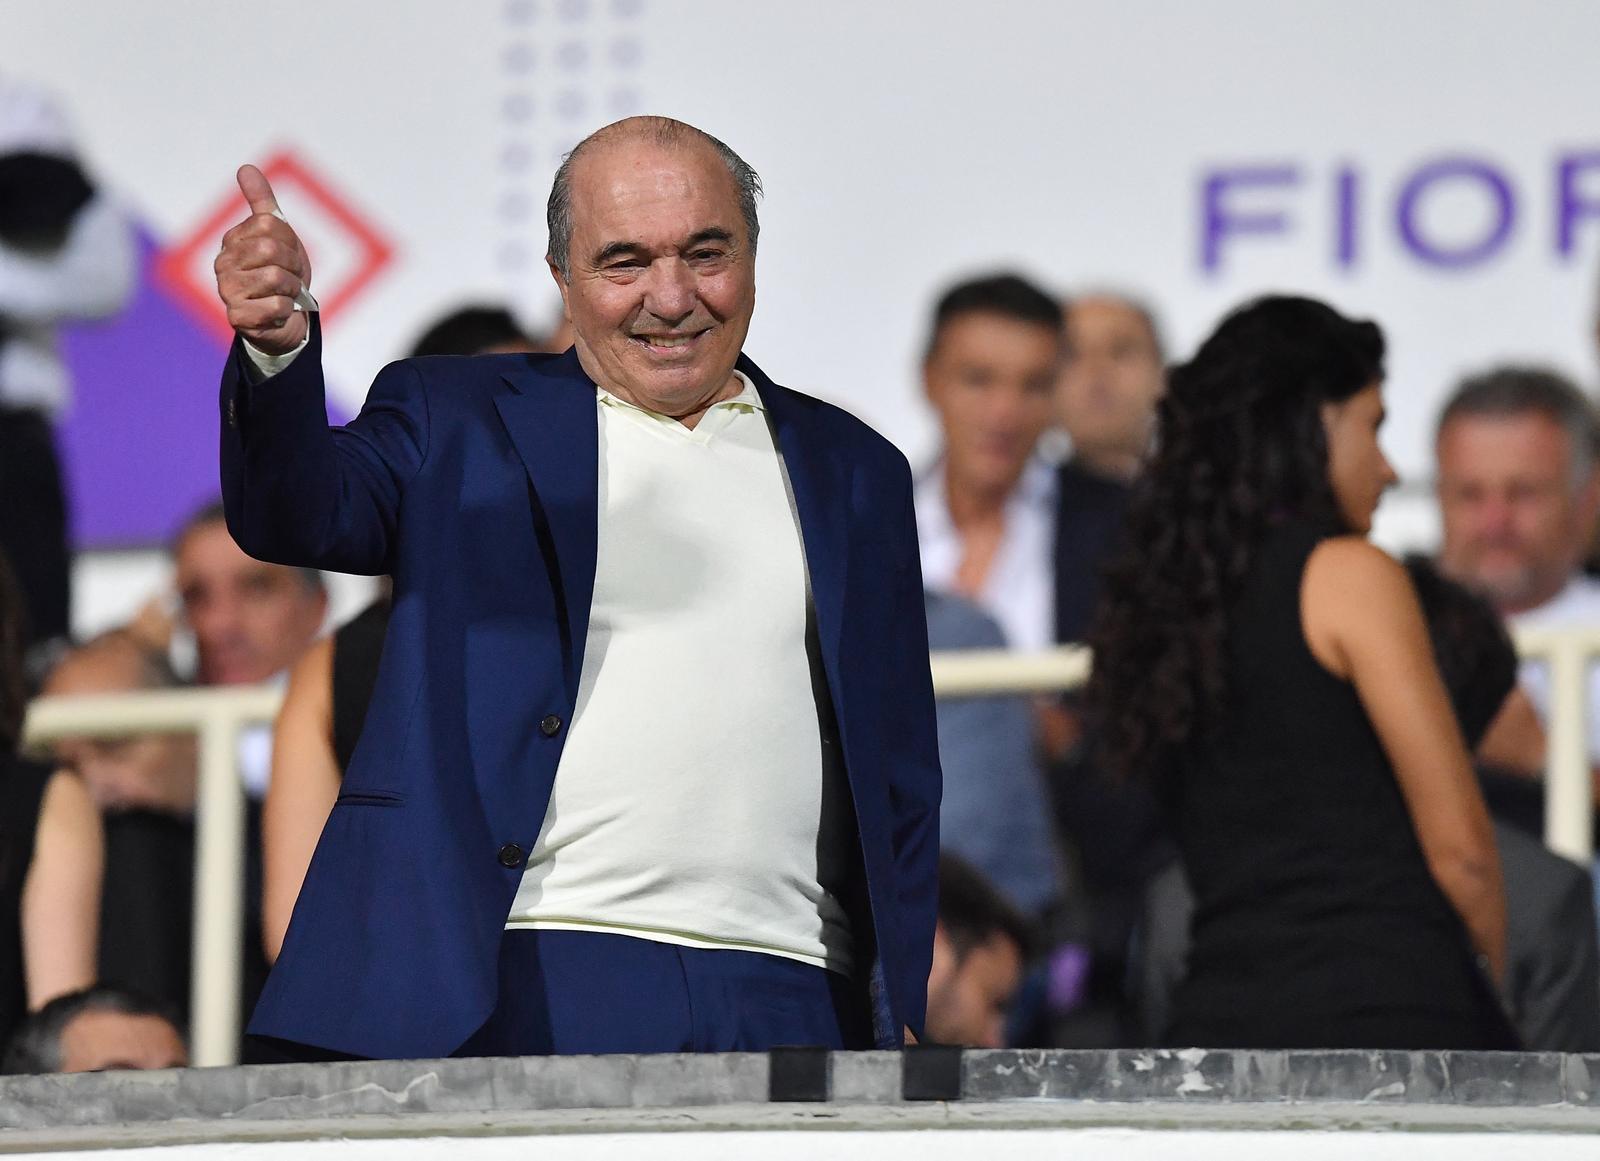 Soccer Football - Europa Conference League - Group F - Fiorentina v Ferencvaros - Stadio Artemio Franchi, Florence, Italy - October 5, 2023  Fiorentina owner Rocco B. Commisso is seen before the match REUTERS/Jennifer Lorenzini Photo: JENNIFER LORENZINI/REUTERS